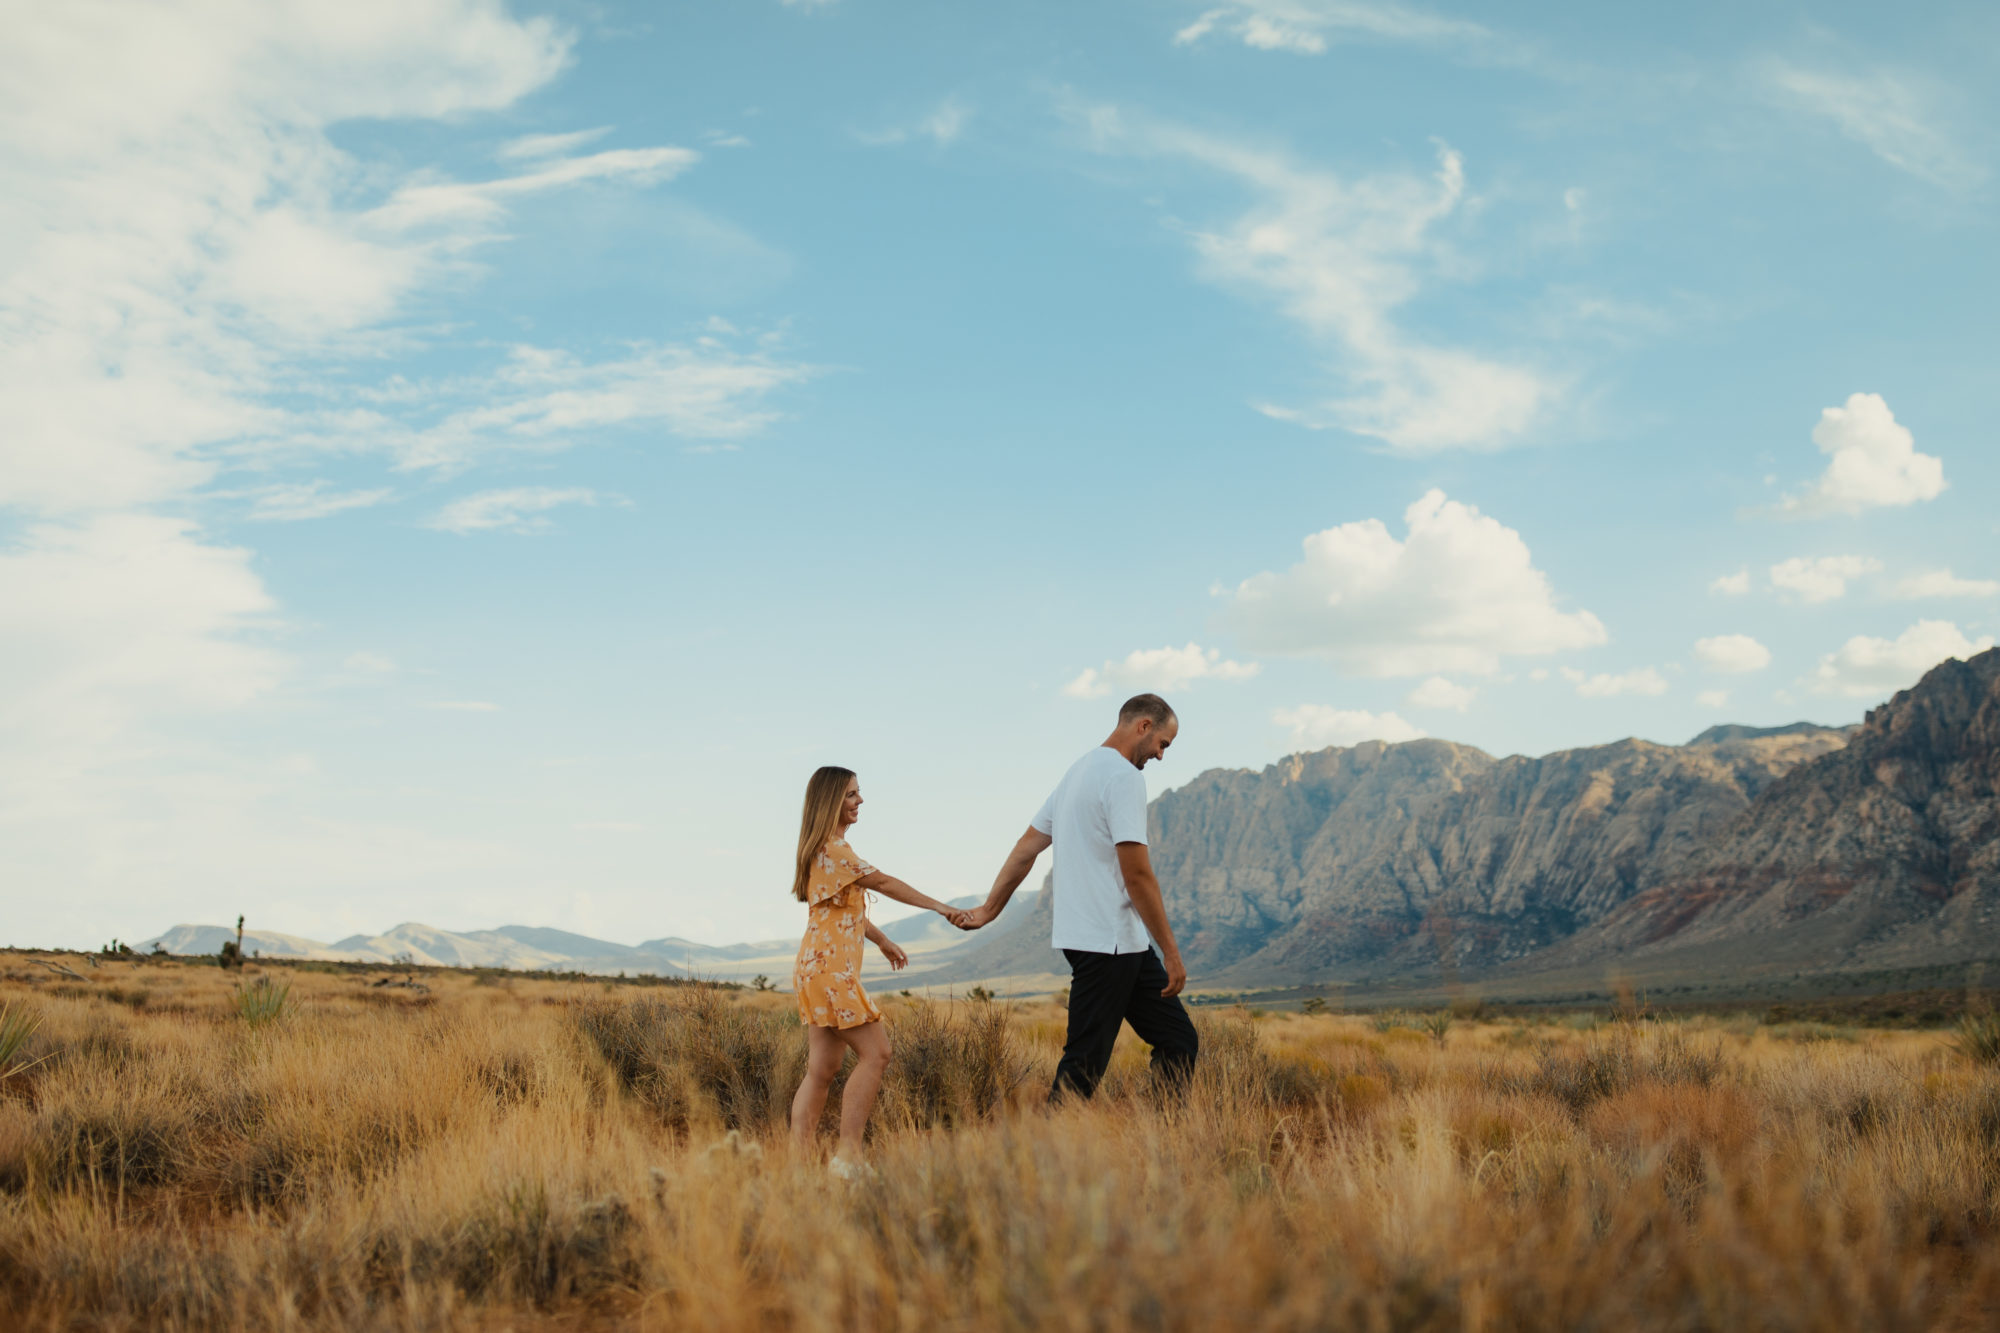 engaged couple walking through the field in the desert with mountains in the background